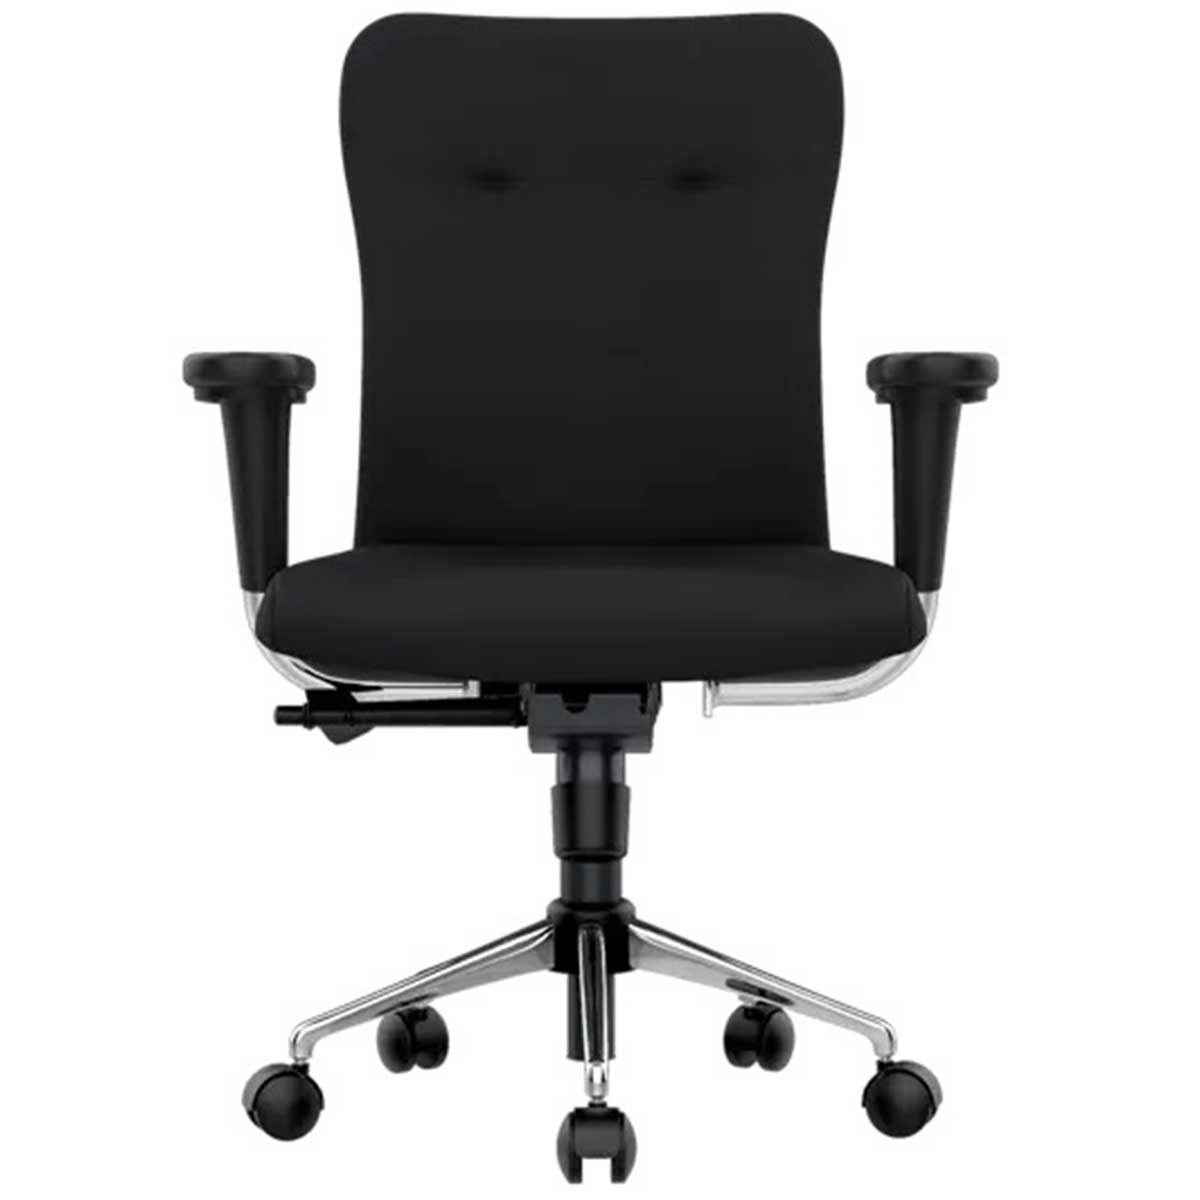 Fabric Office Chair Manufacturers, Suppliers in Greater Kailash Ii